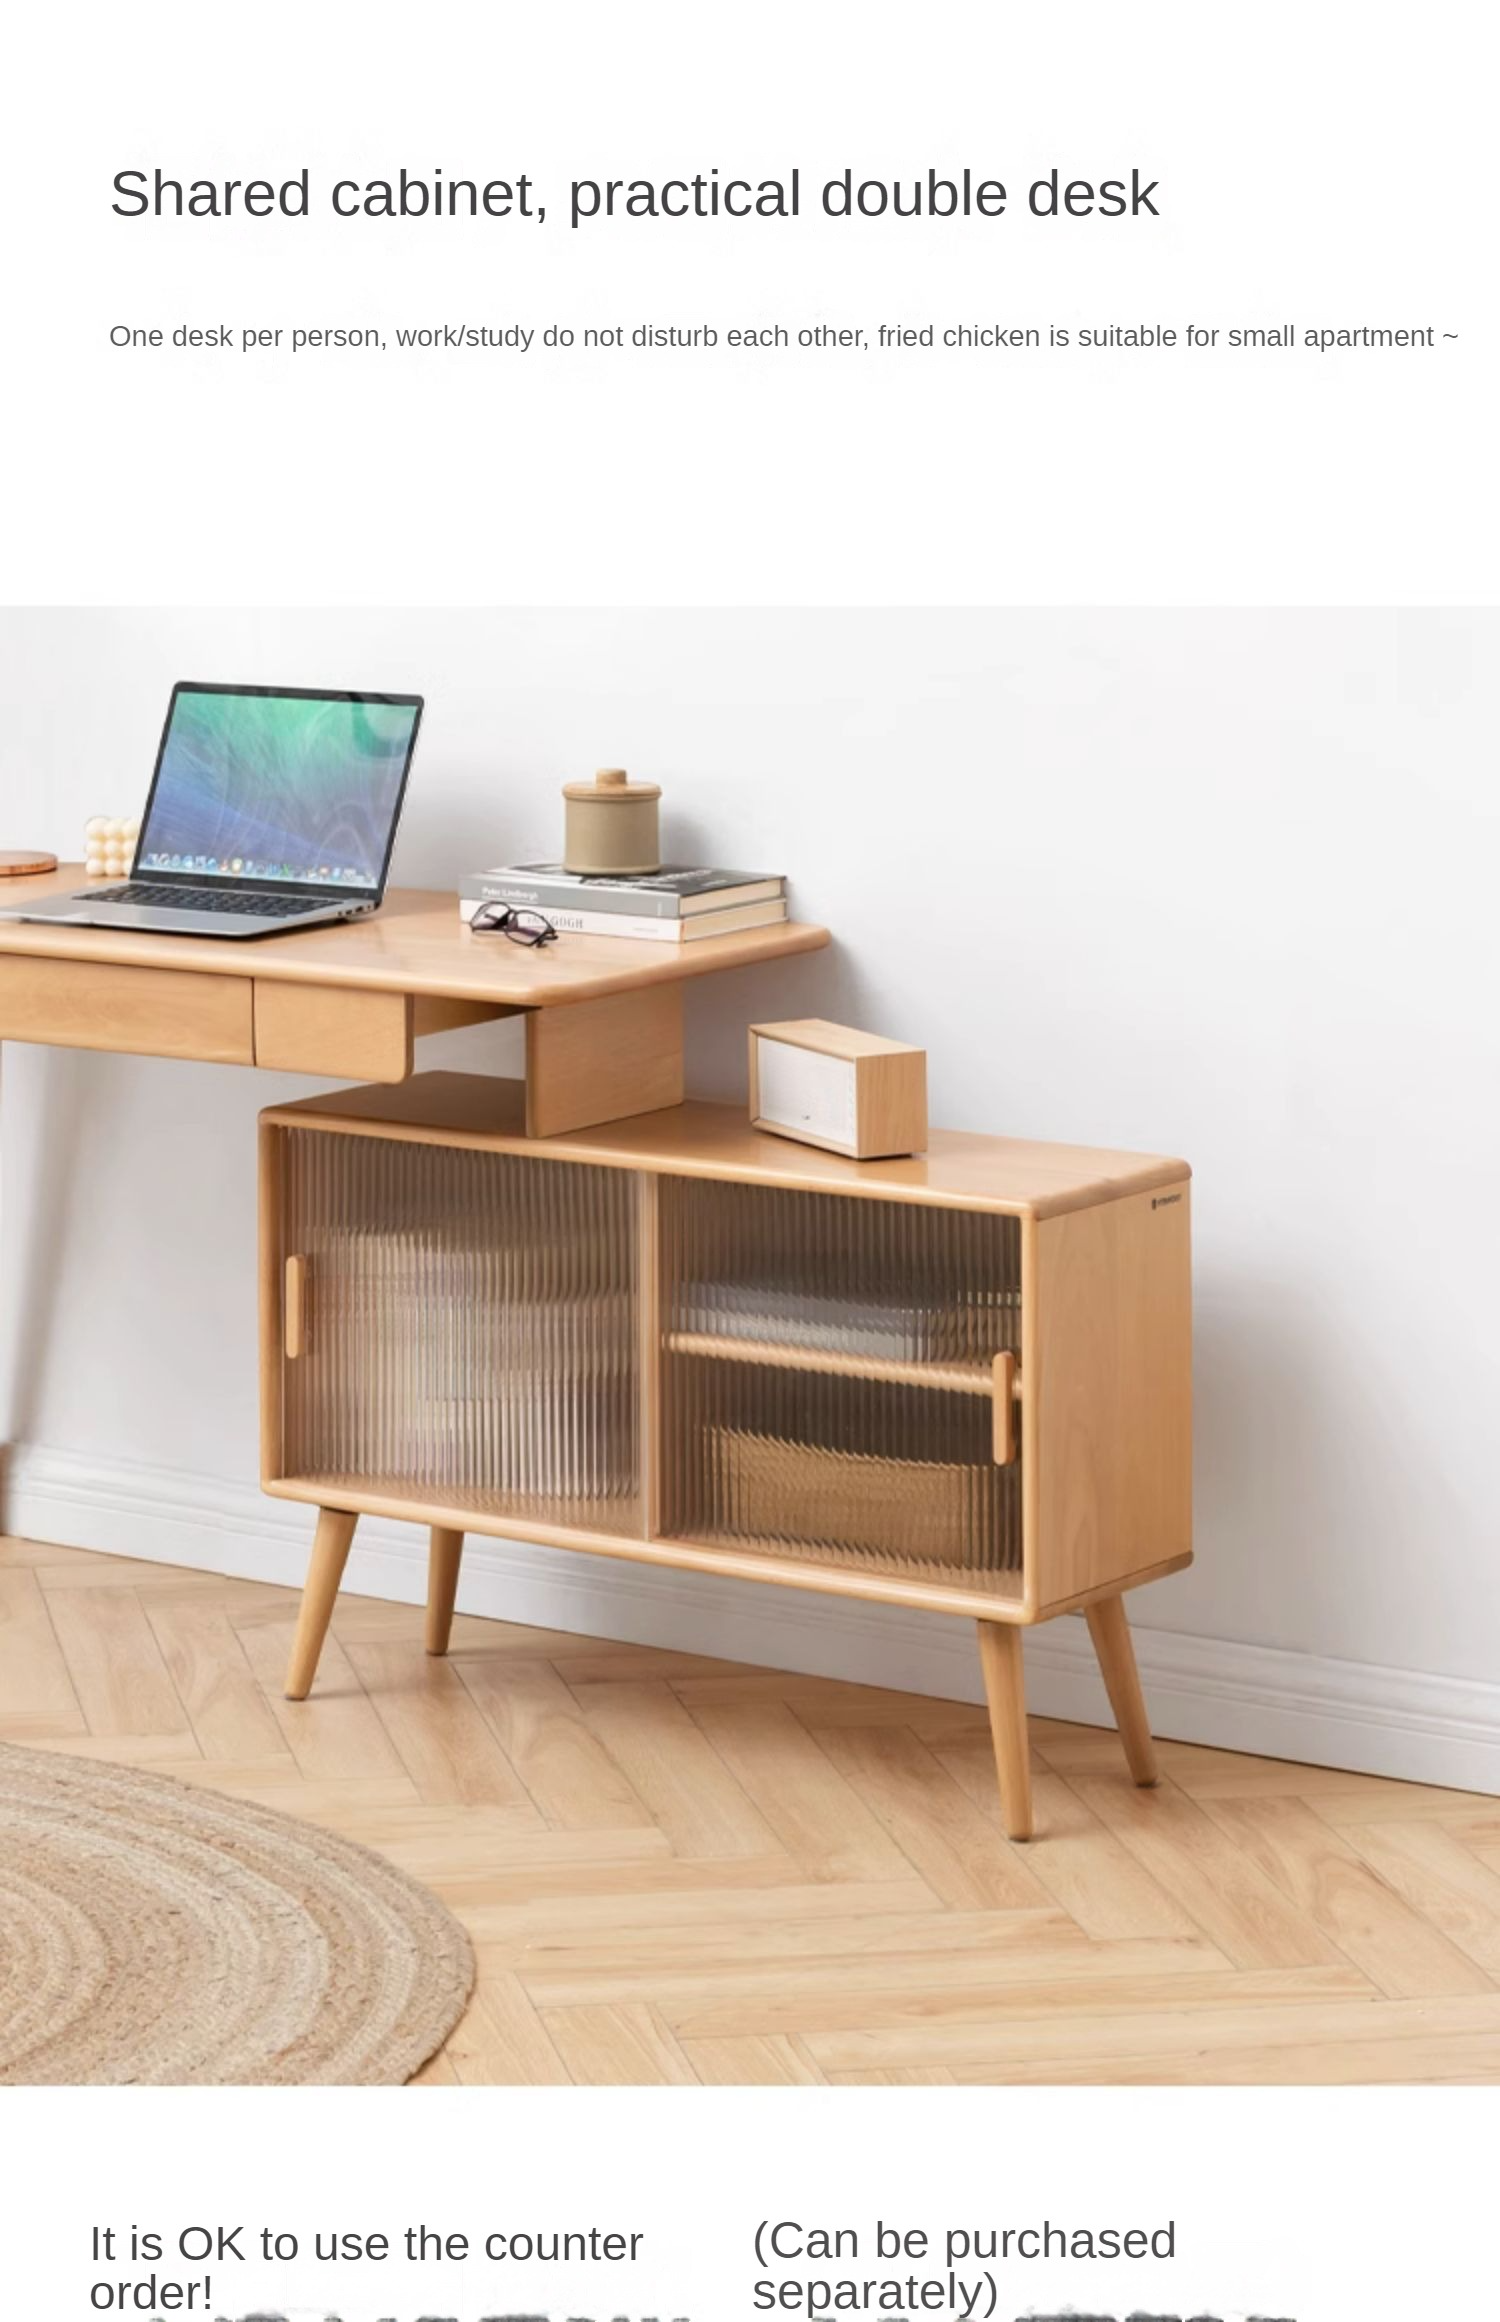 Beech solid wood retractable and adjustable desk with storage combination"